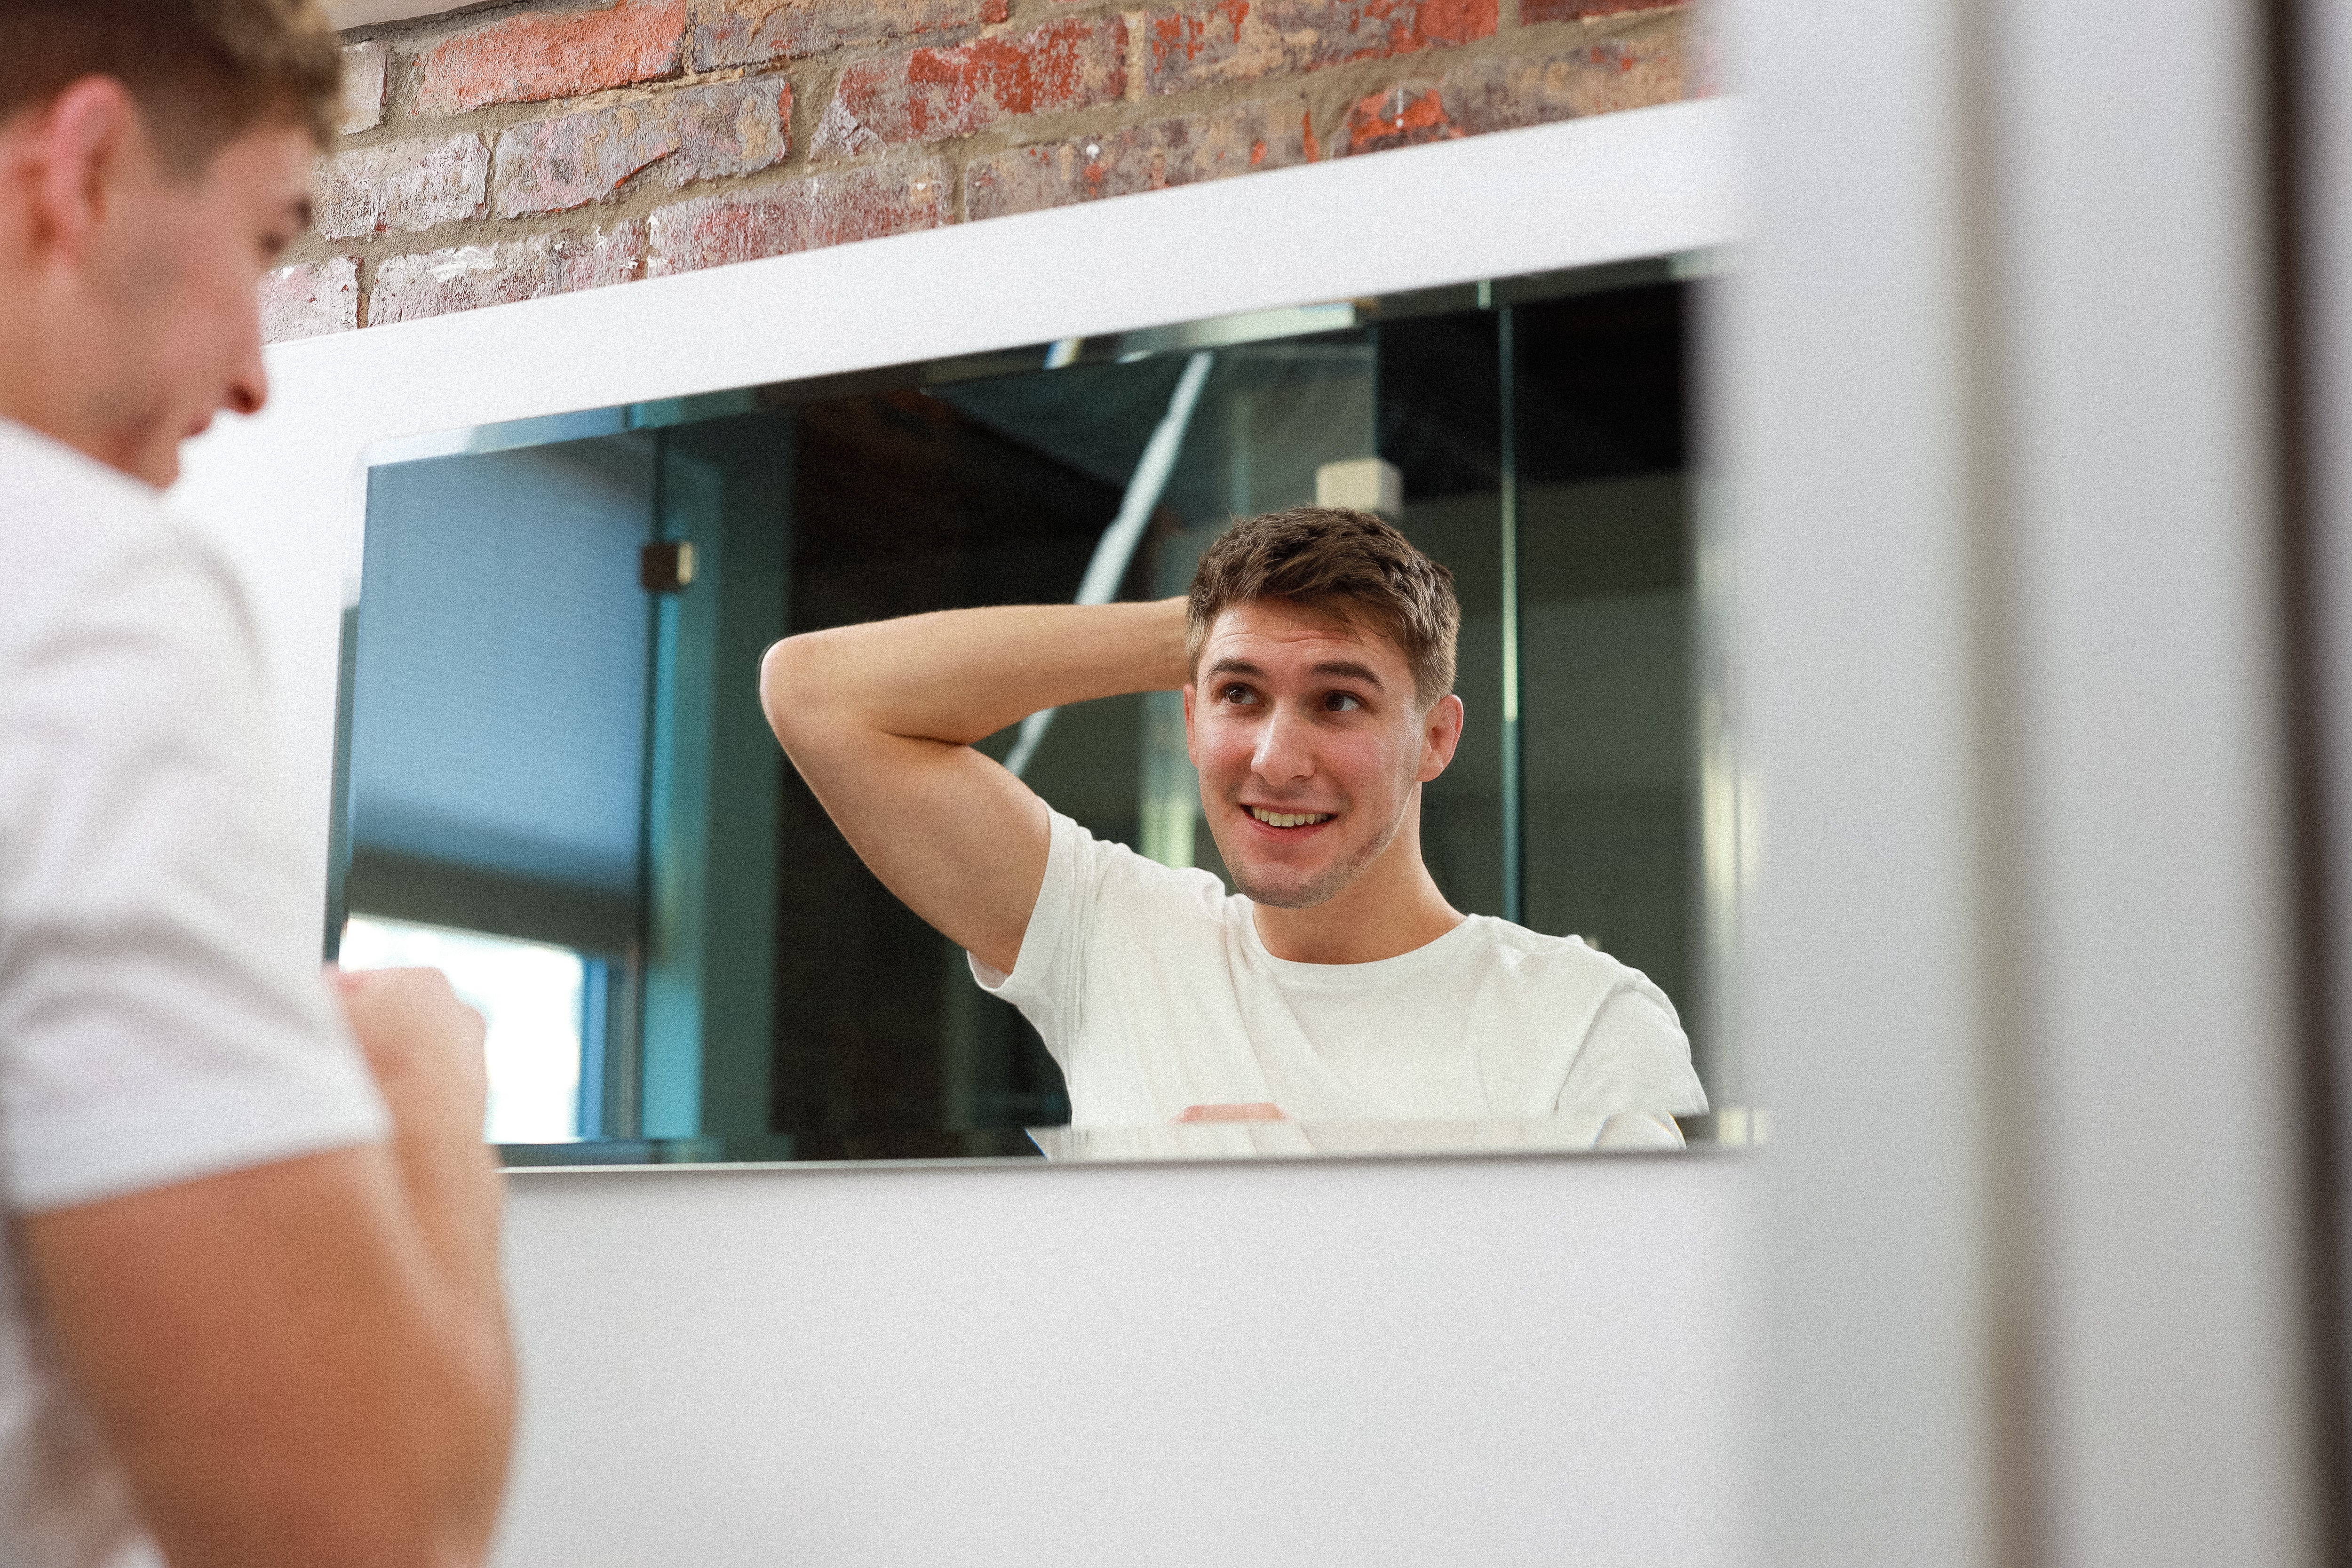 Young man styling his short hair in front of mirror.